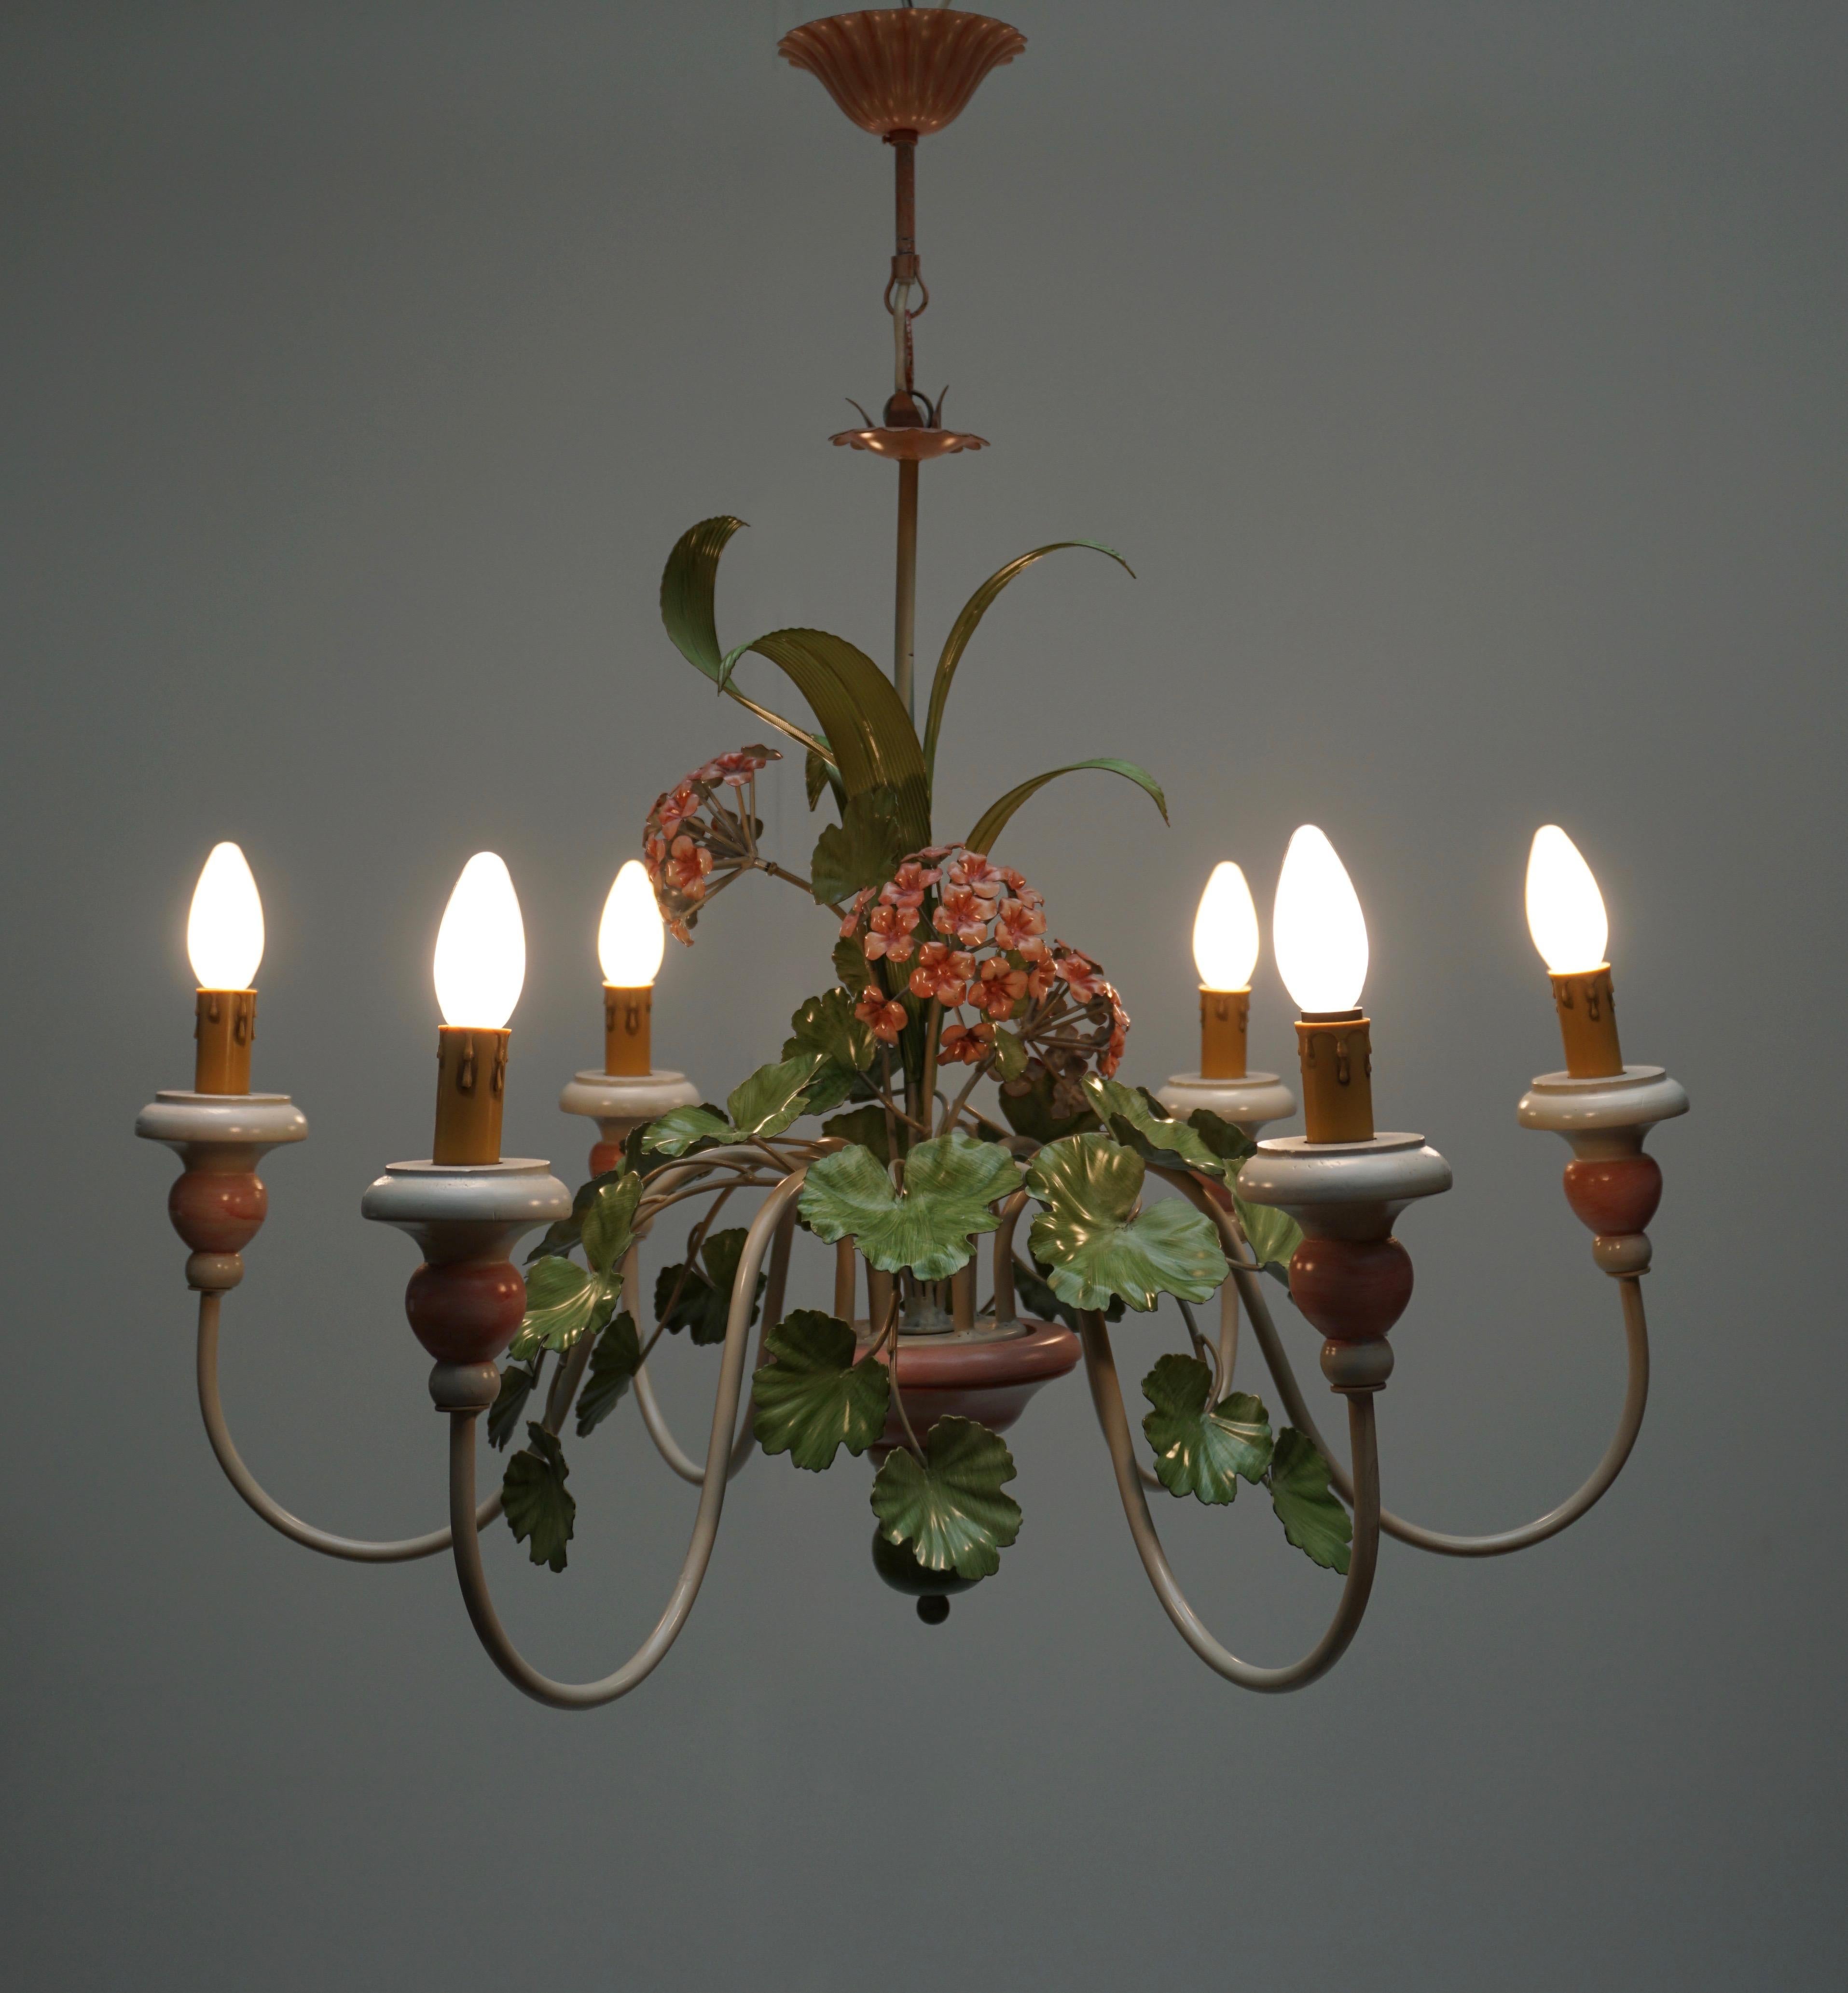 Italian flower chandelier with six E14 bulbs.
Measures: Diameter 78 cm.
Height fixture 60 cm.
Total height with the chain 76.